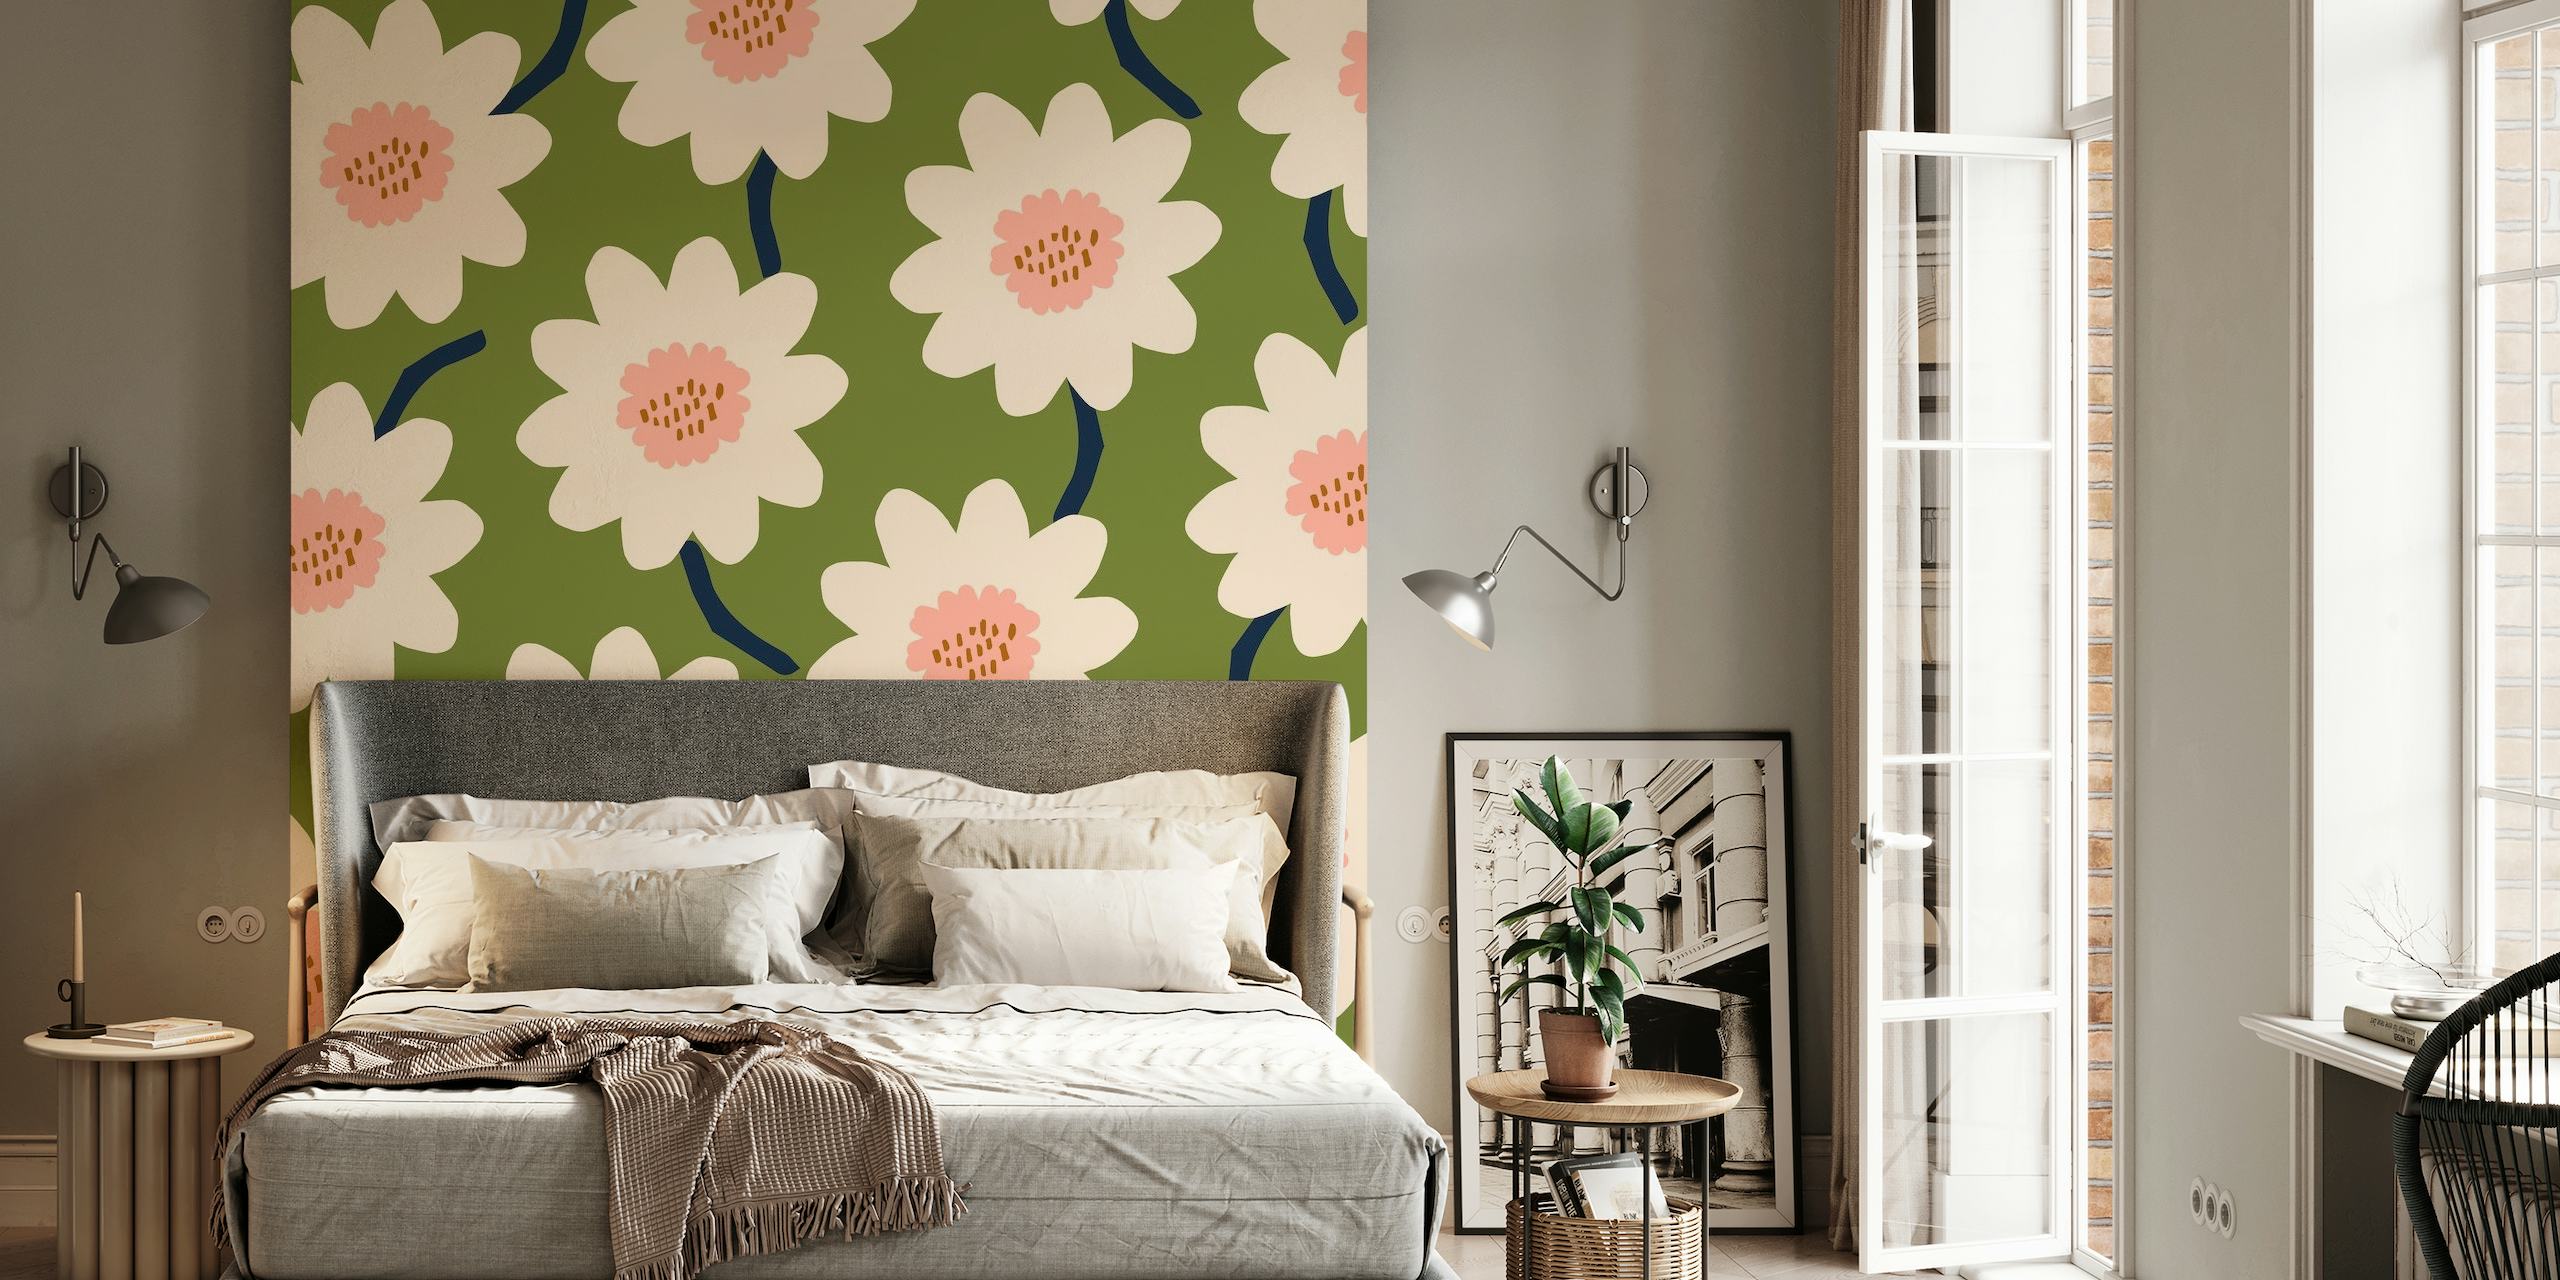 Green floral wall mural with blooming flowers in pastel shades